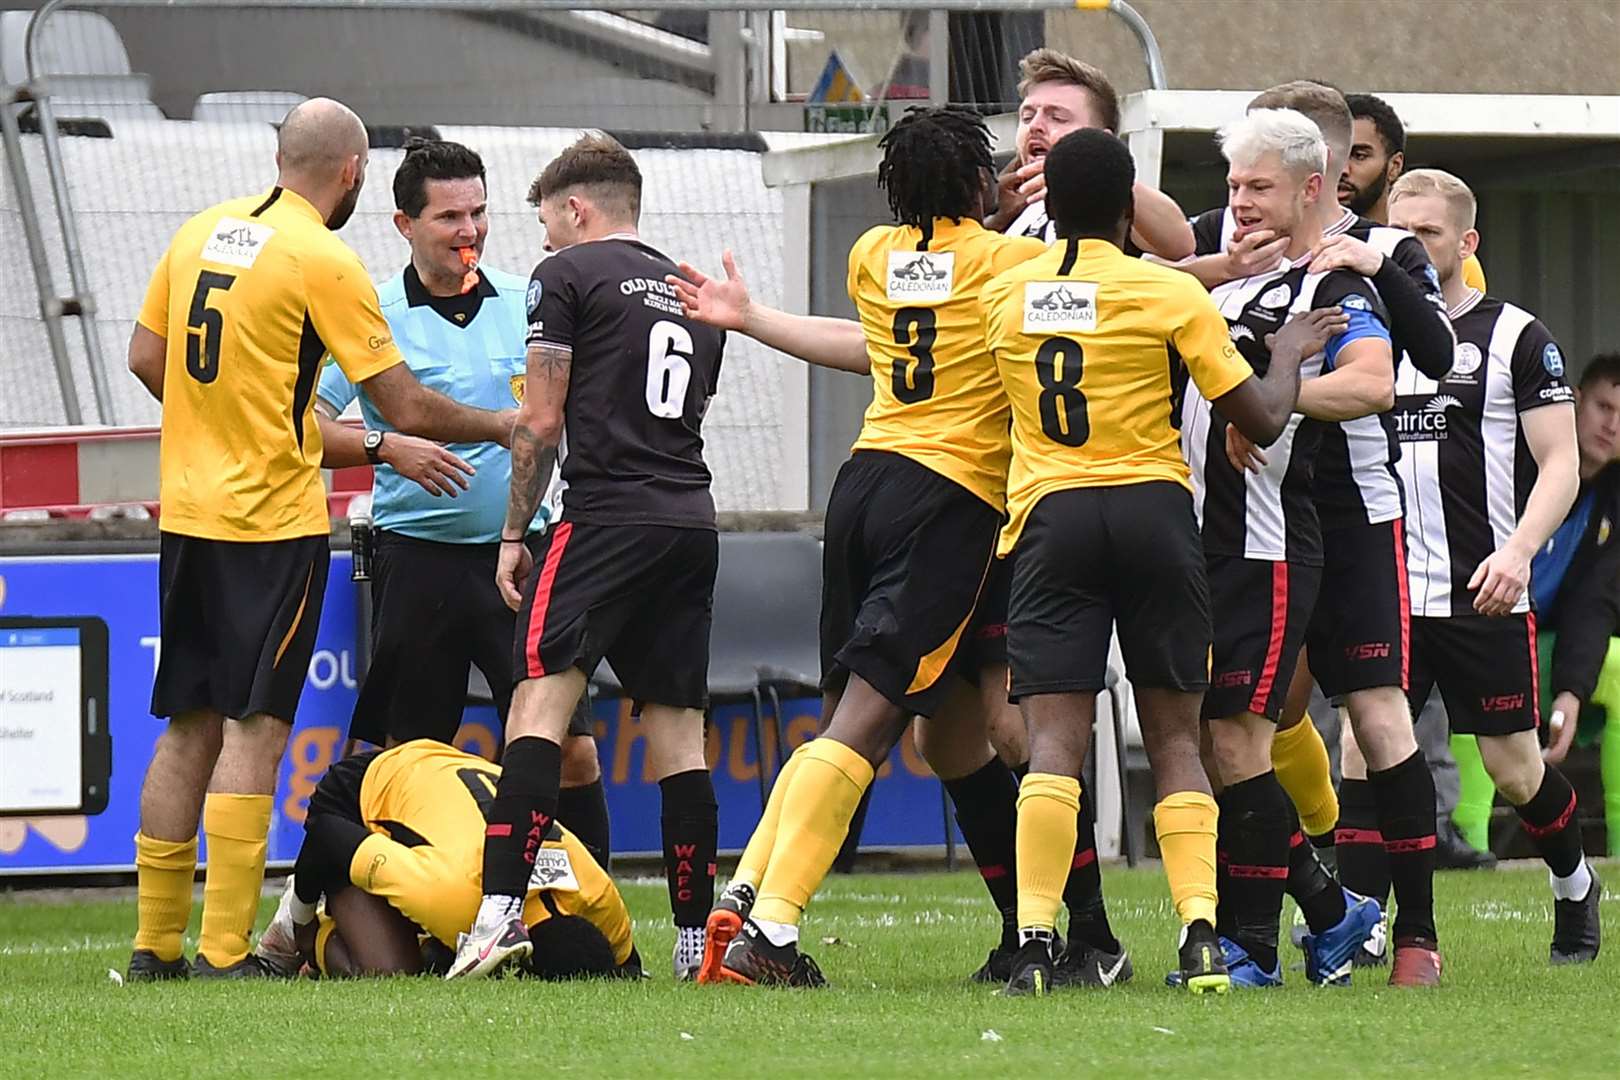 Tensions rise between Wick and Fort William players during the second half at Harmsworth Park. Picture: Mel Roger